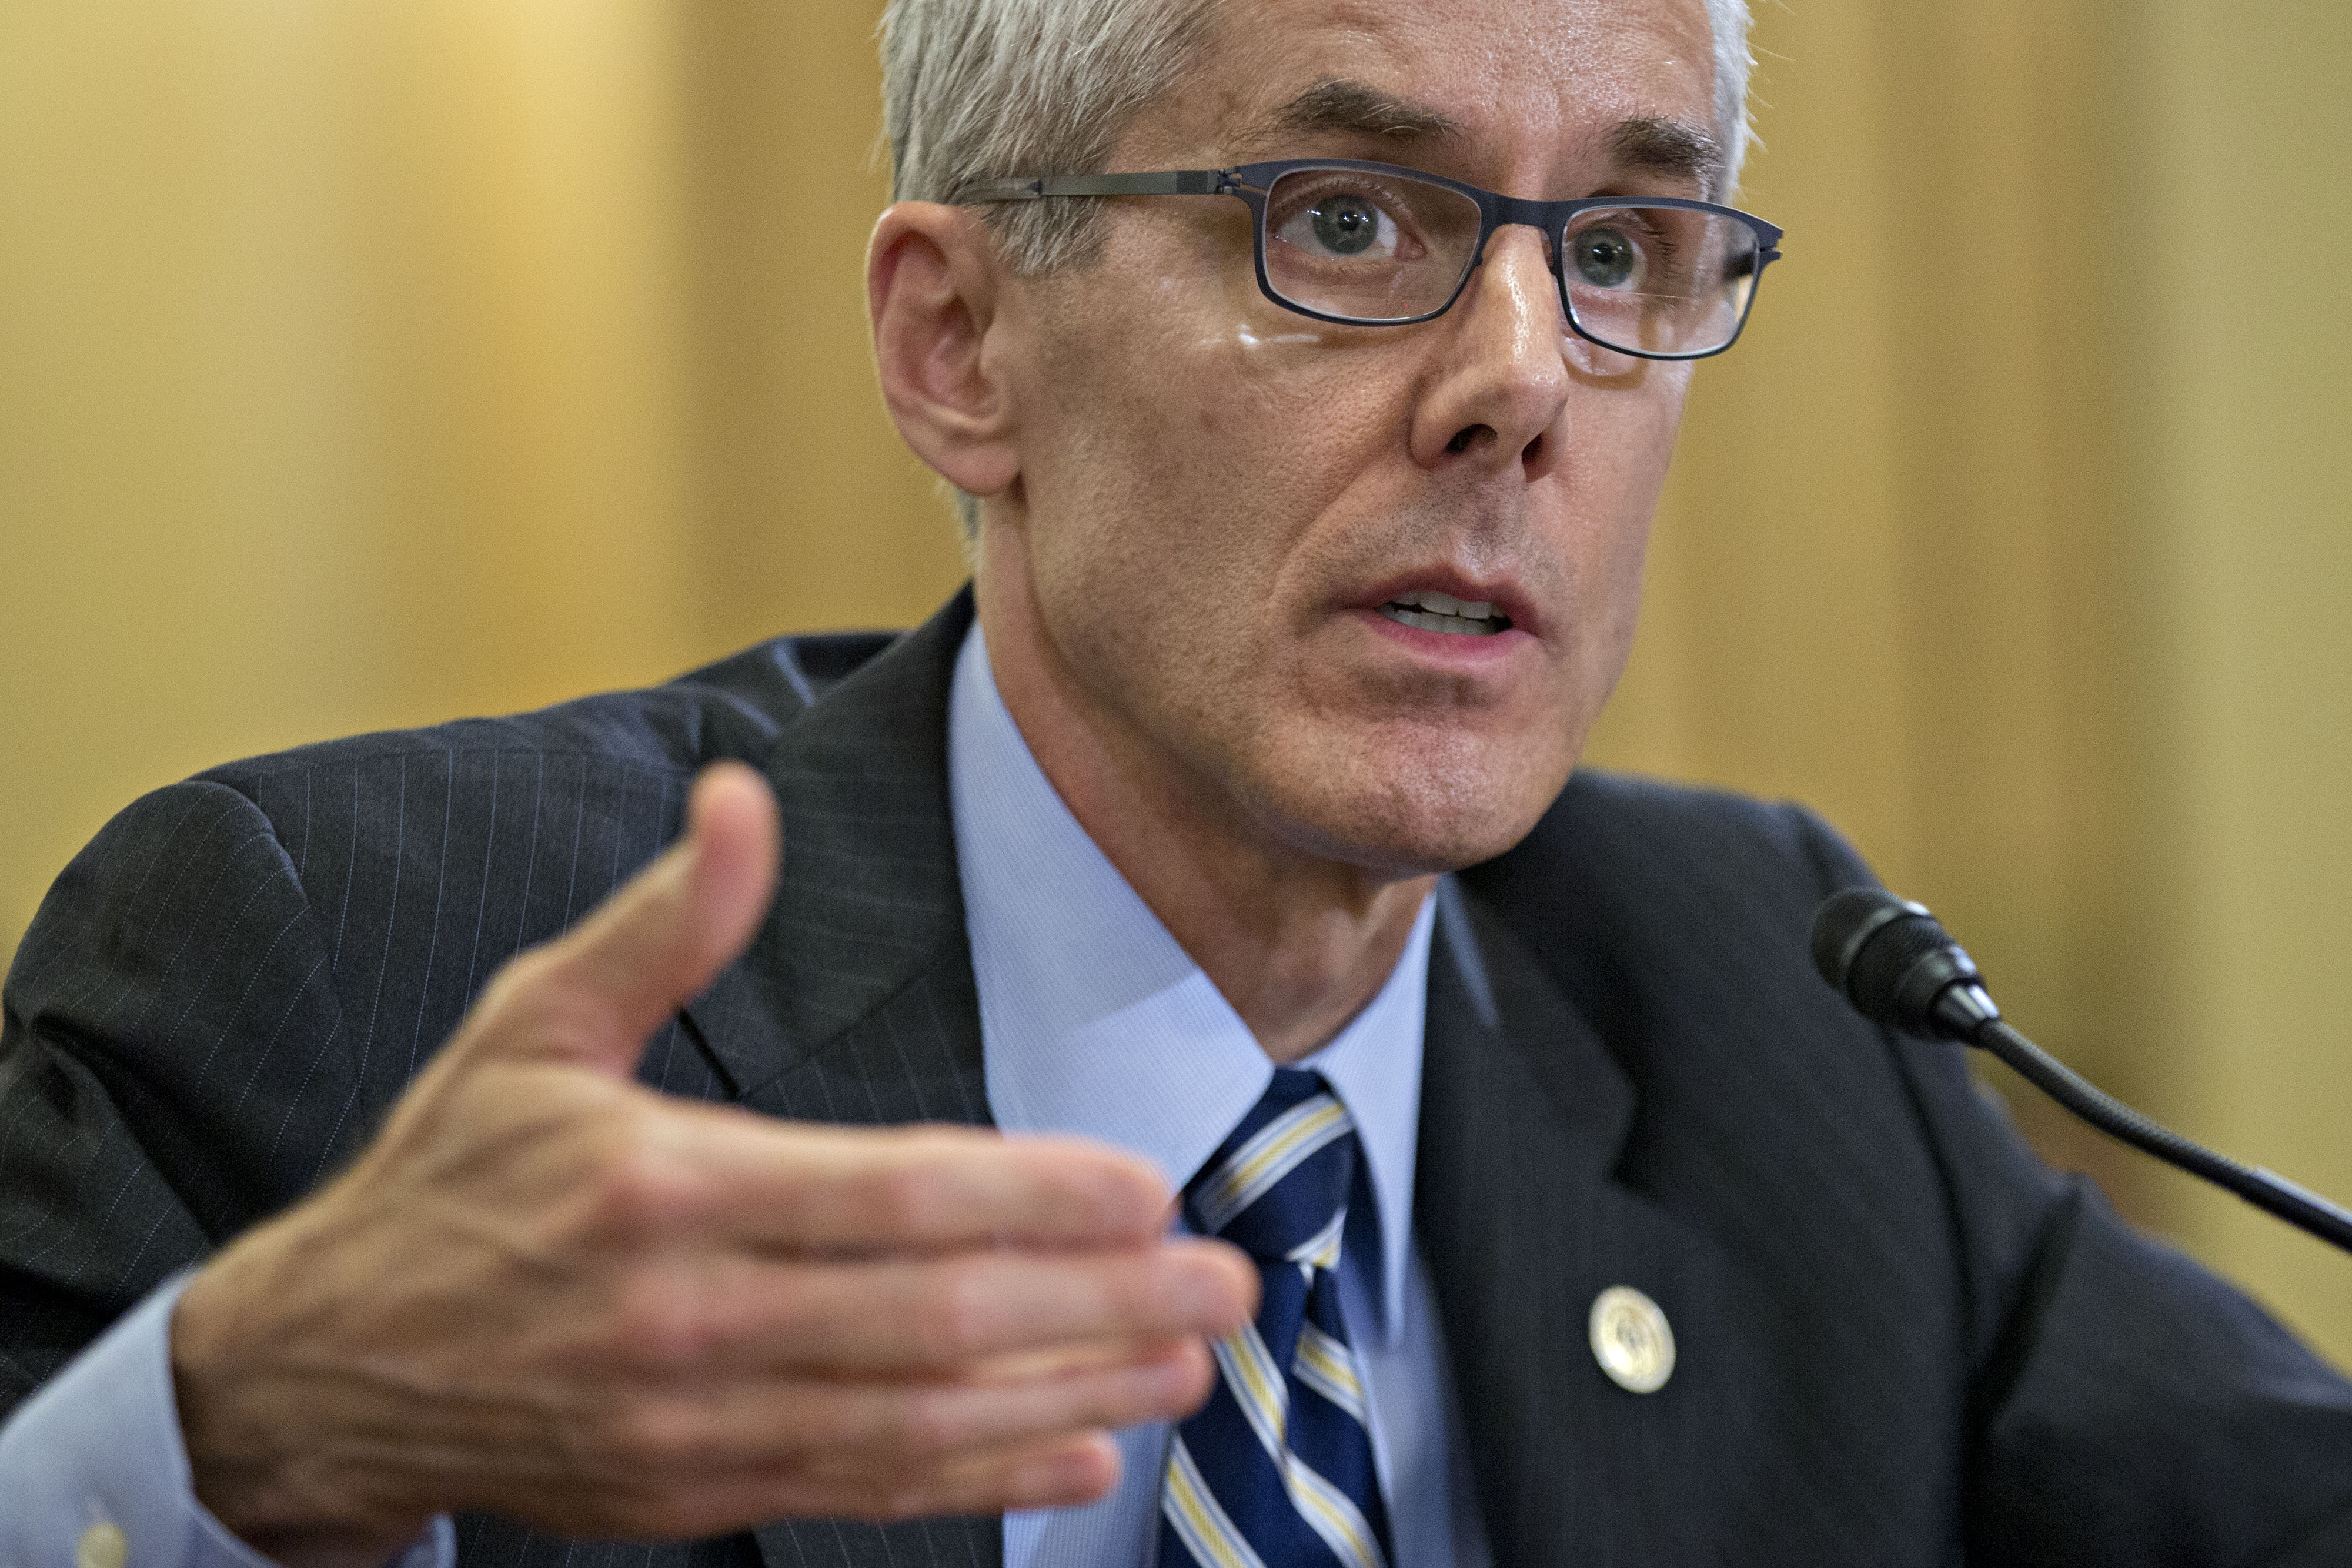 Peter Neffenger, administrator of the Transportation Security Administration (TSA), speaks during a House Homeland Security Committee hearing in Washington, D.C., on May 25. (Andrew Harrer—Bloomberg/Getty Images)